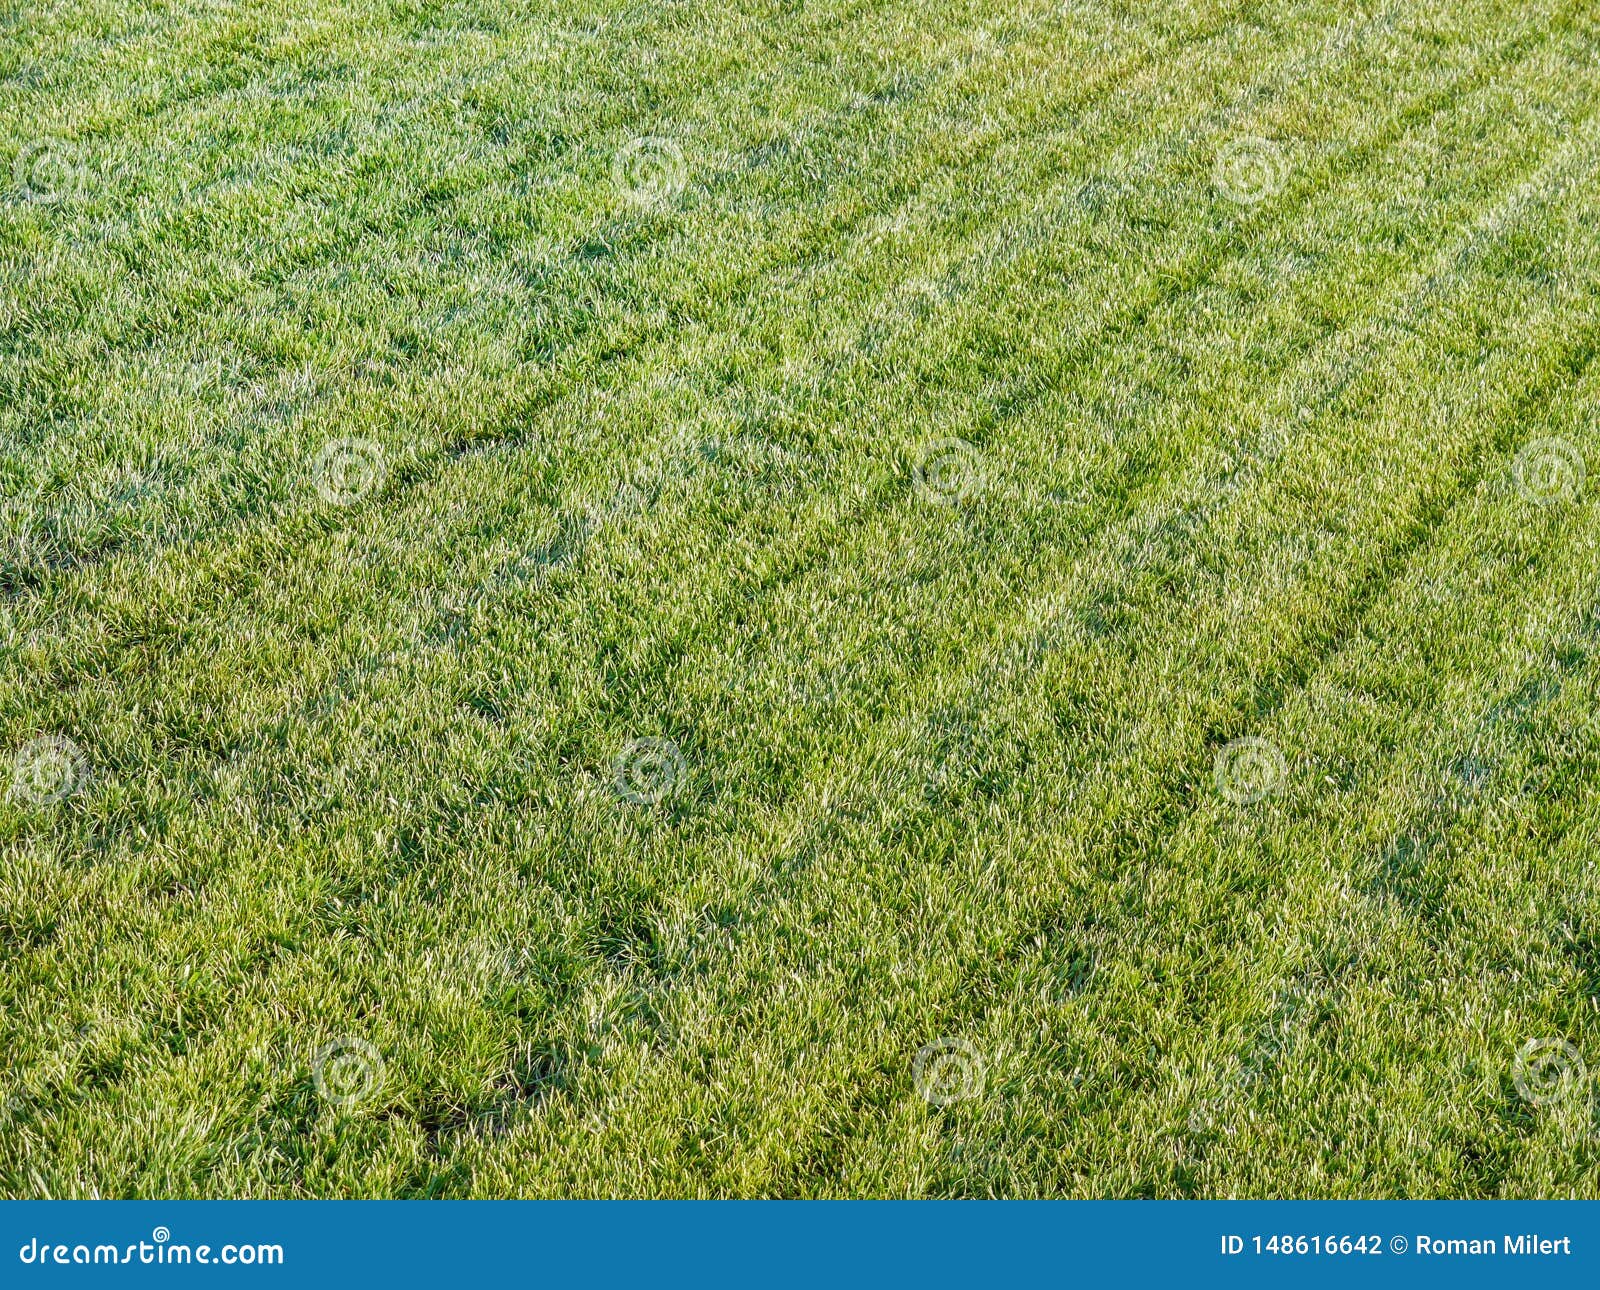 Freshly mowed grass stock photo. Image of cutting, nature - 148616642